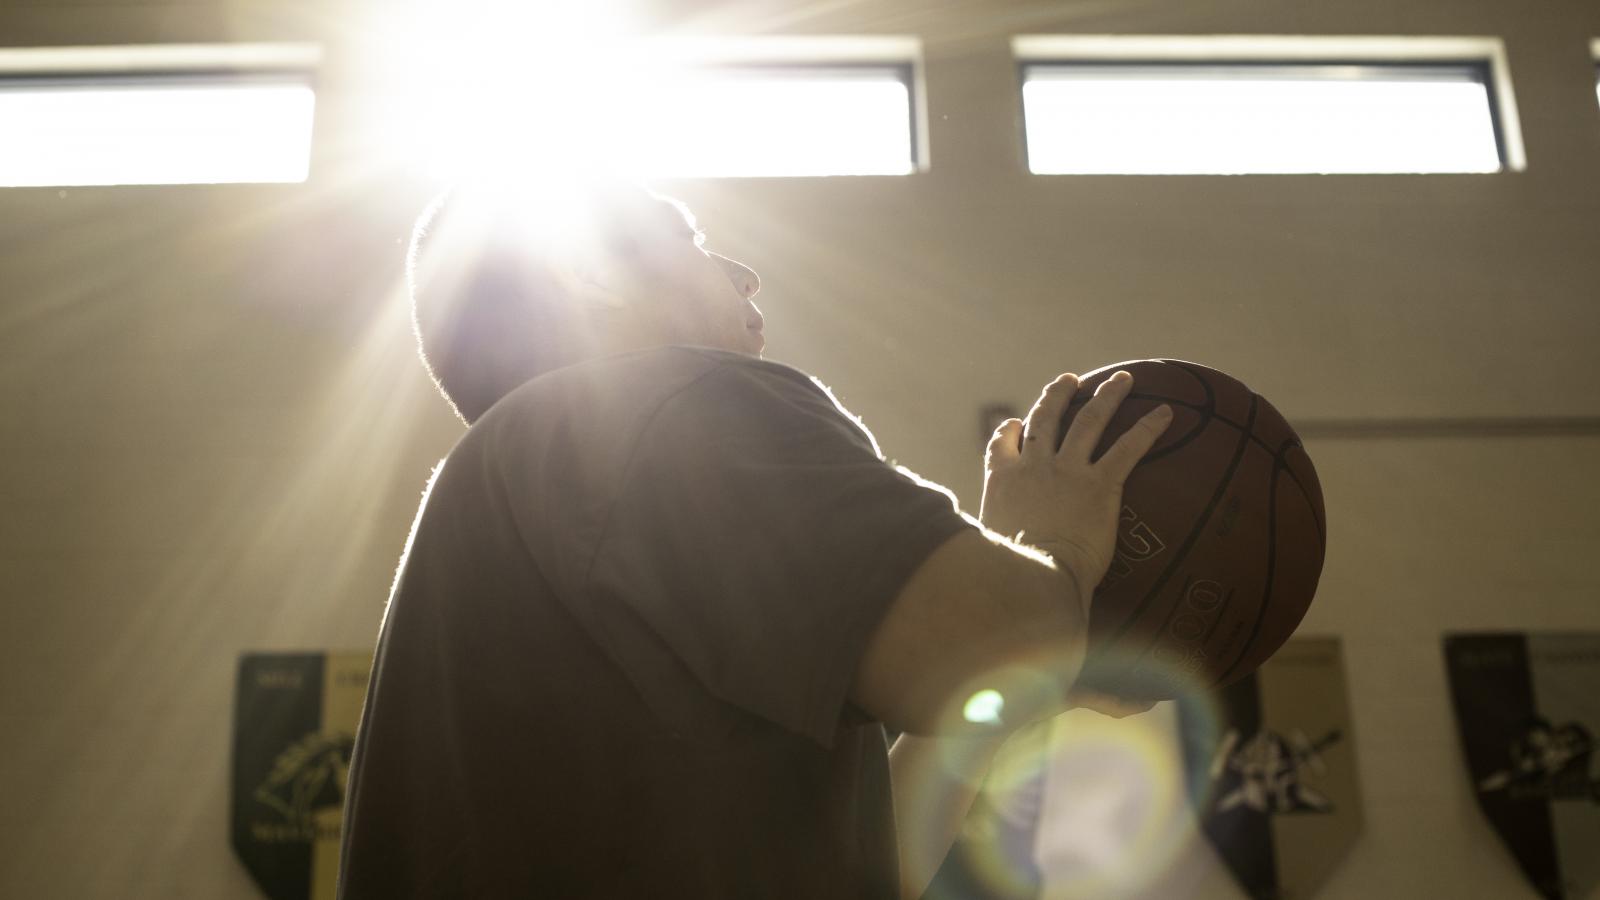 Close-up view of teenager holding a basketball, poised to make a shot 